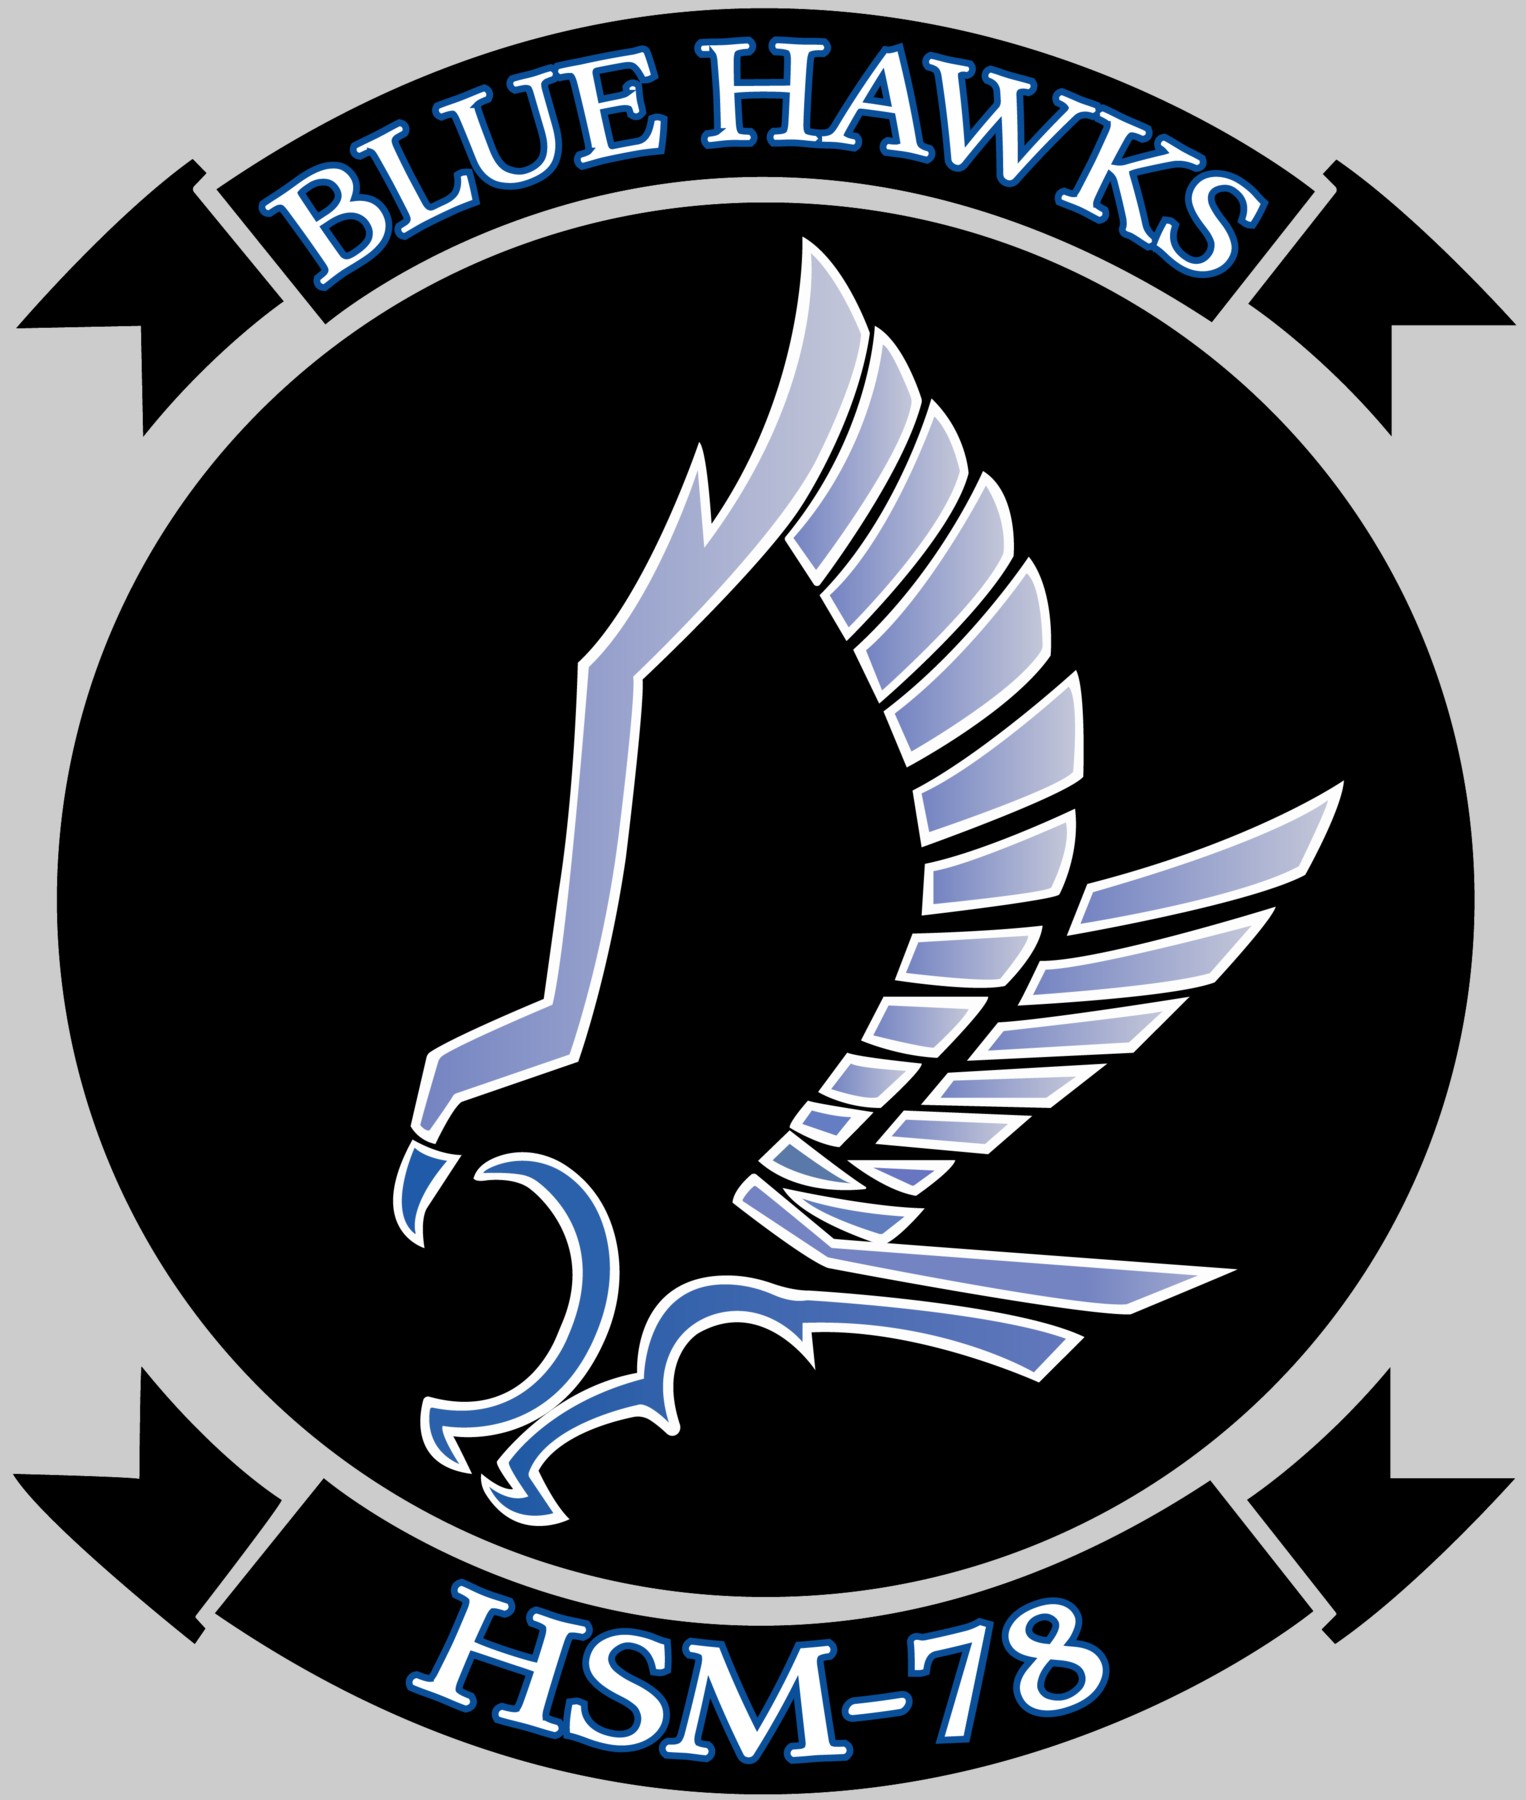 hsm-78 blue hawks insignia crest patch badge helicopter maritime strike squadron mh-60r seahawk us navy 02x